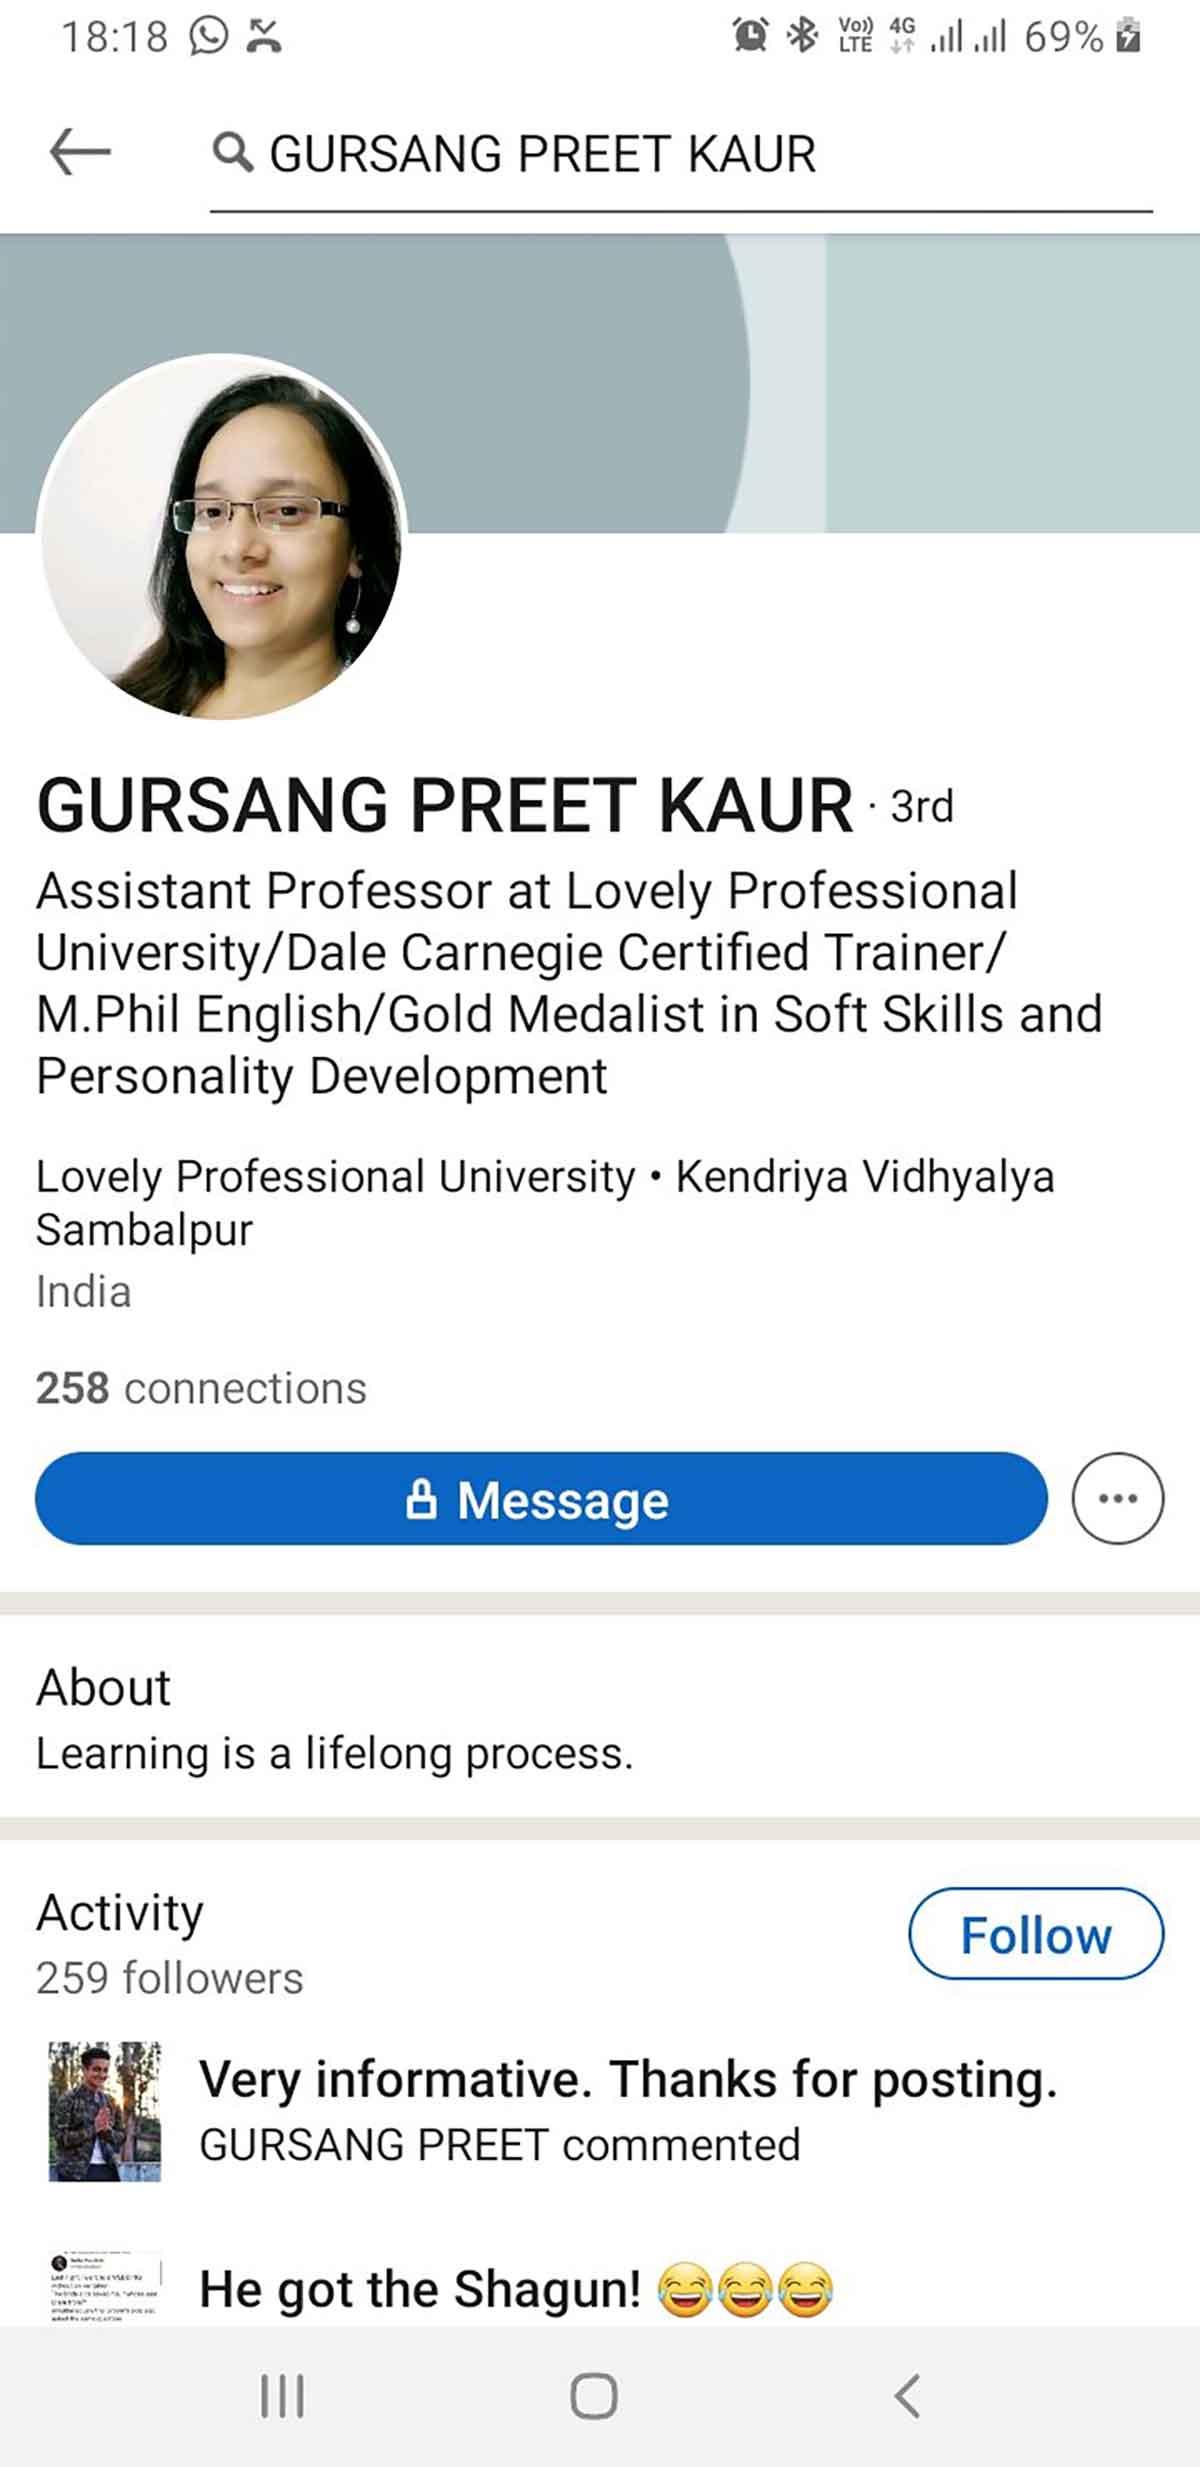 Gursang Preet Kaur, a professor at the Lovely Professional University (LPU), has been sacked by the university after a video of her insulting Lord Ram had gone viral on the internet